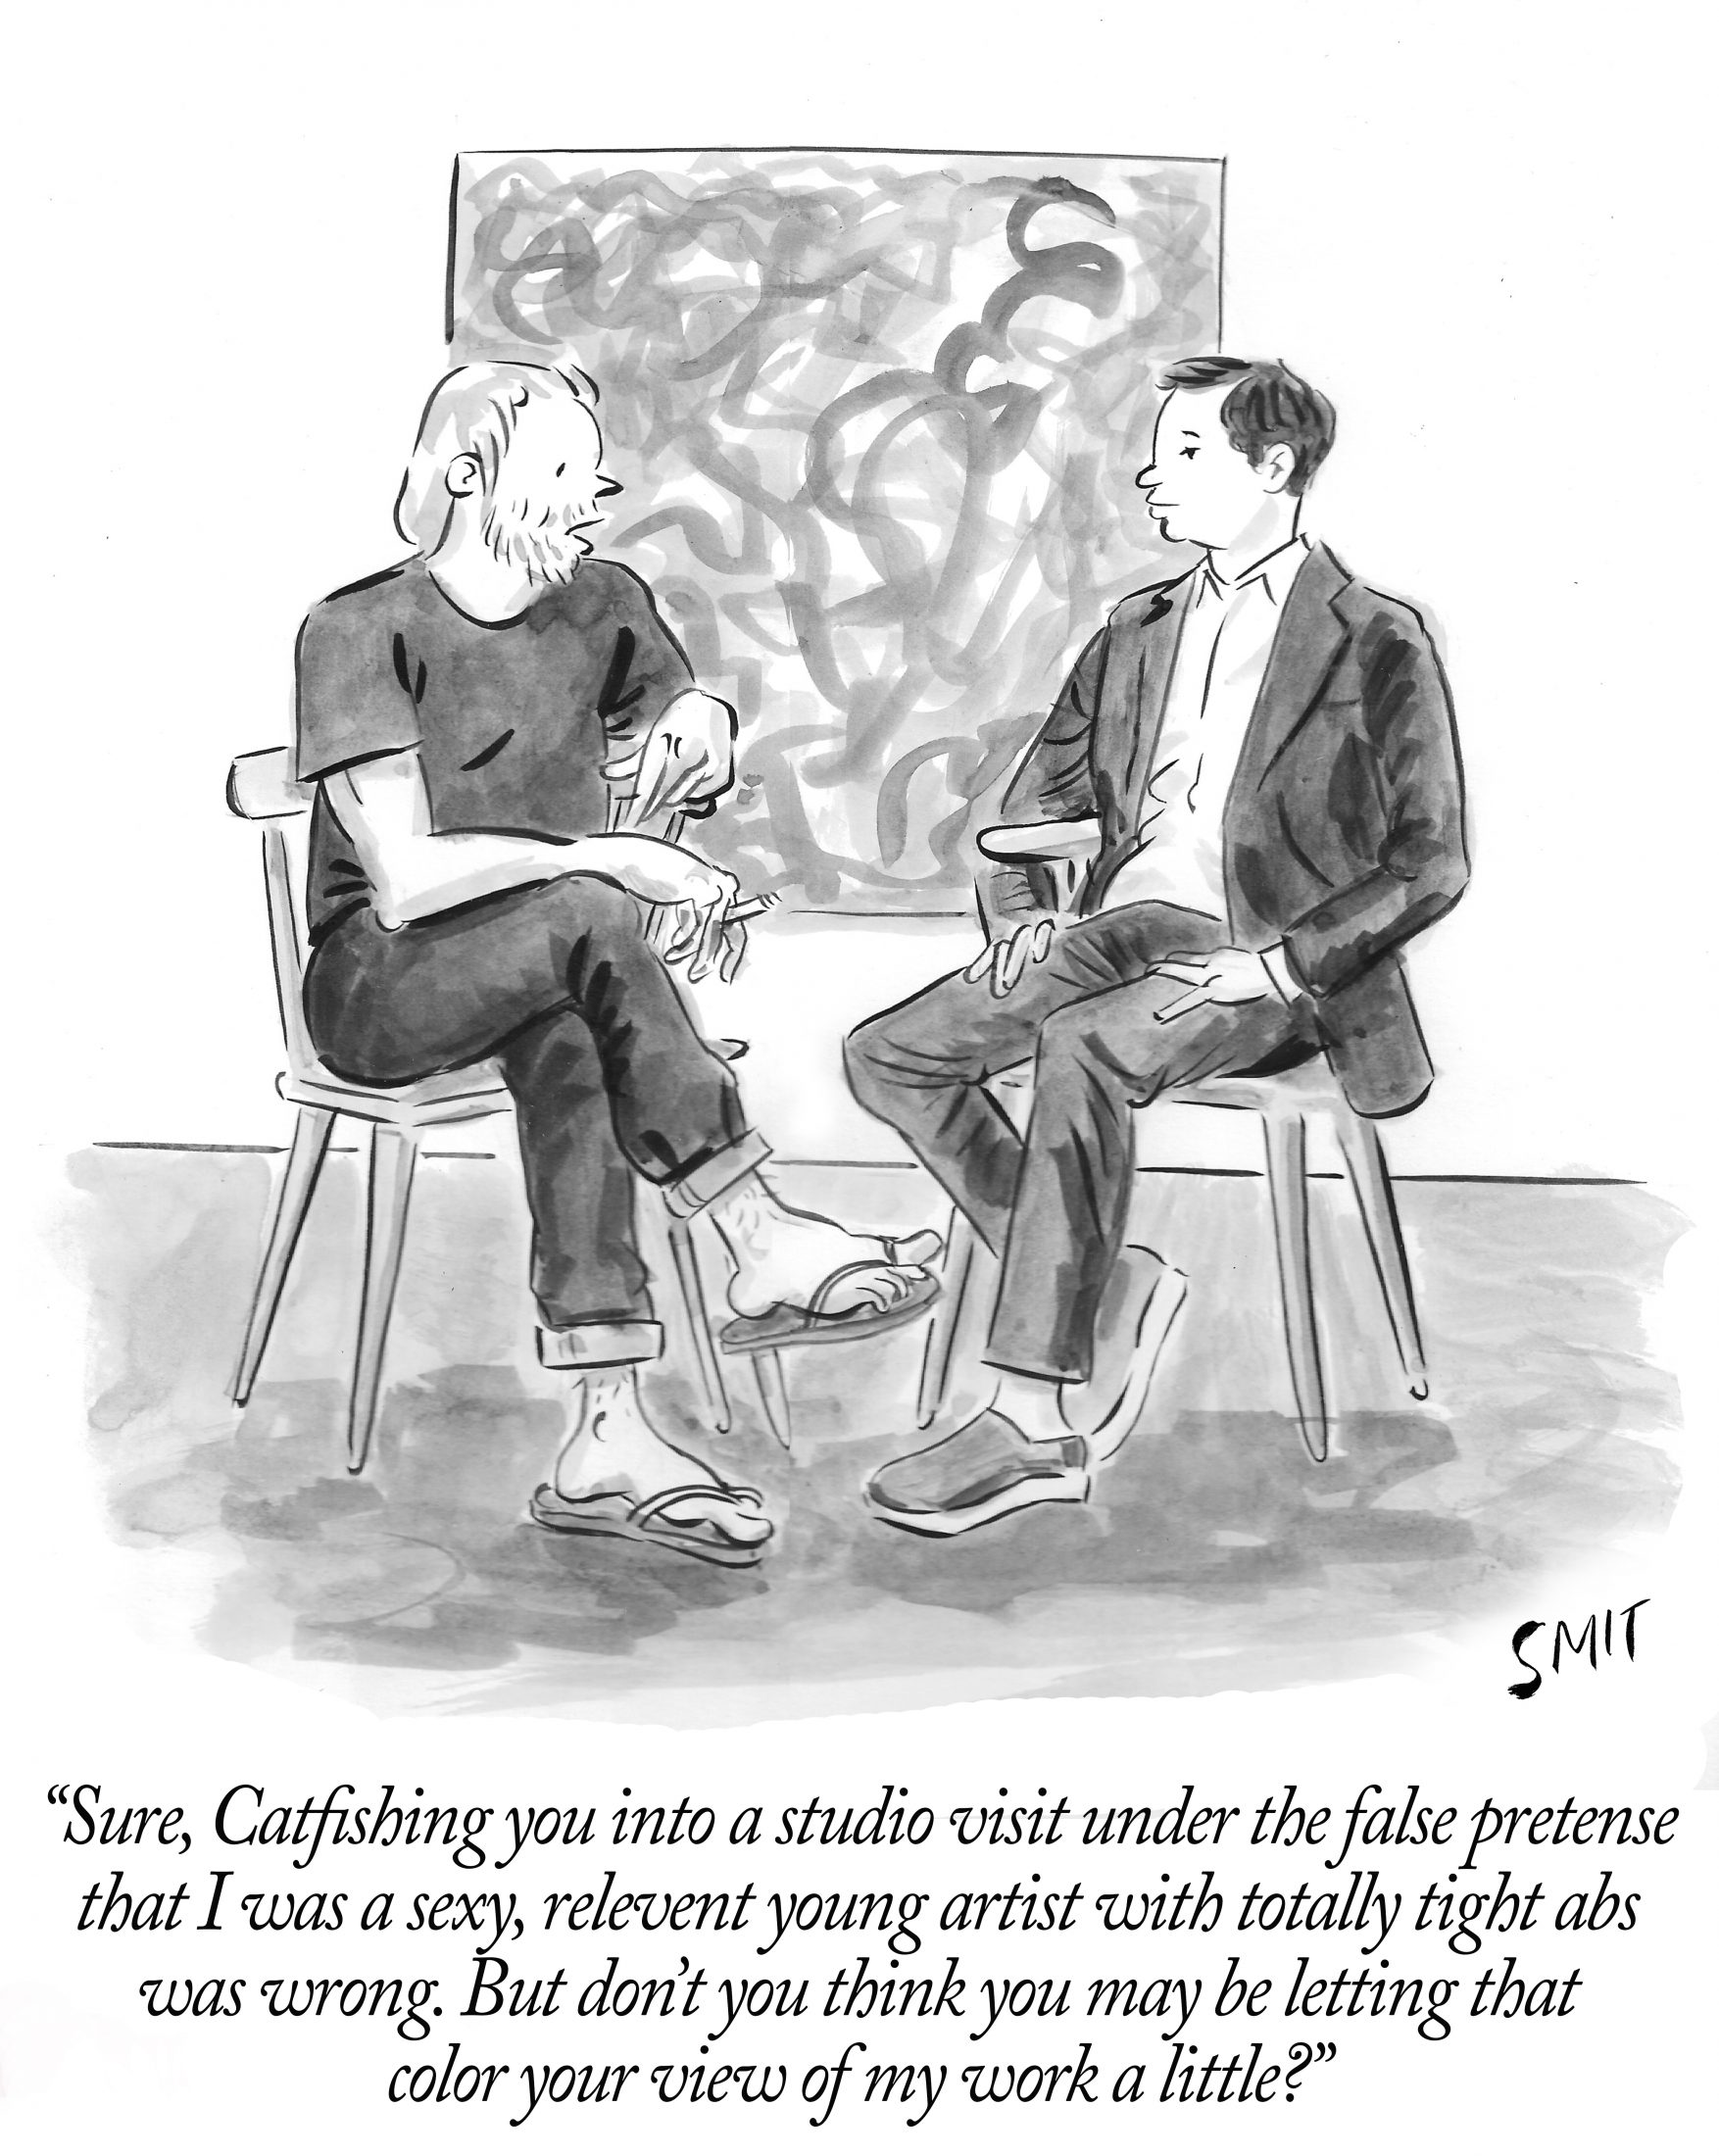 Under What Circumstances Is Catfishing Acceptable in the Art World?  [Cartoon]